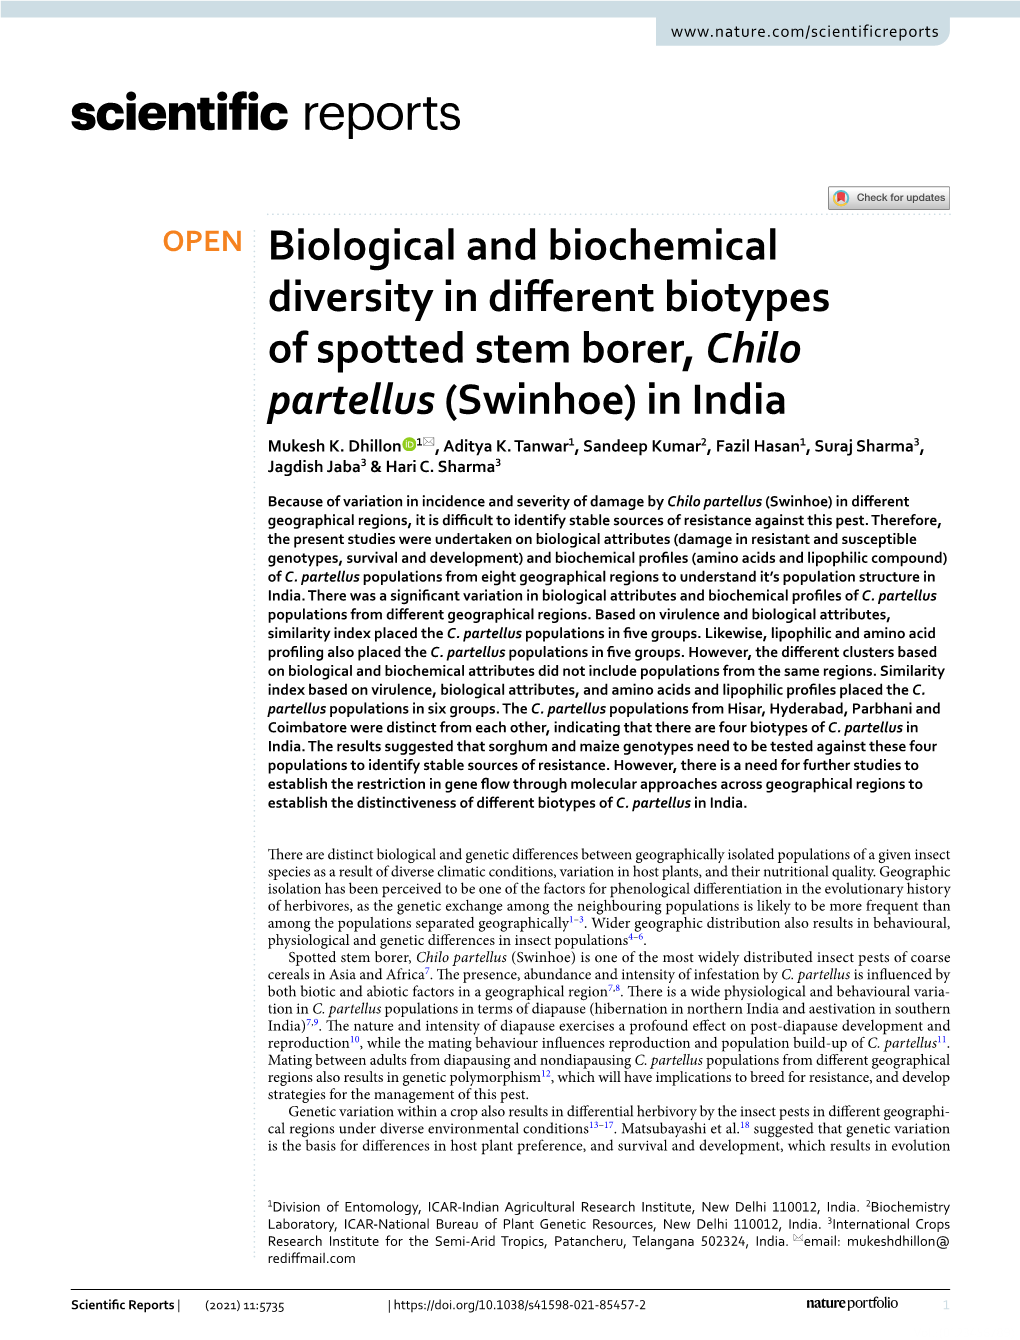 Biological and Biochemical Diversity in Different Biotypes of Spotted Stem